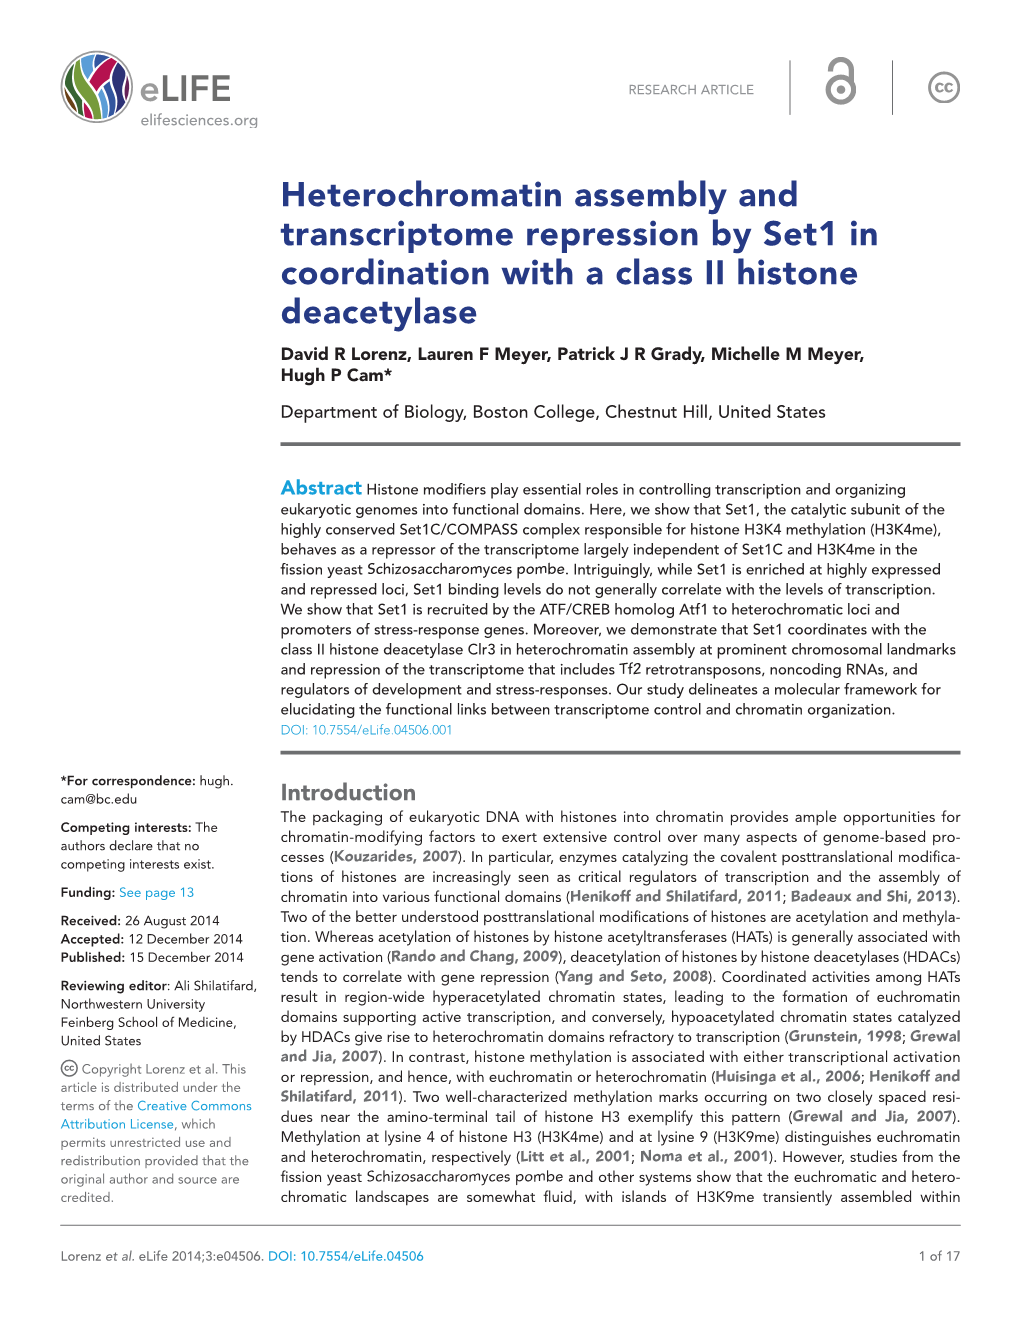 Heterochromatin Assembly and Transcriptome Repression by Set1 in Coordination with a Class II Histone Deacetylase